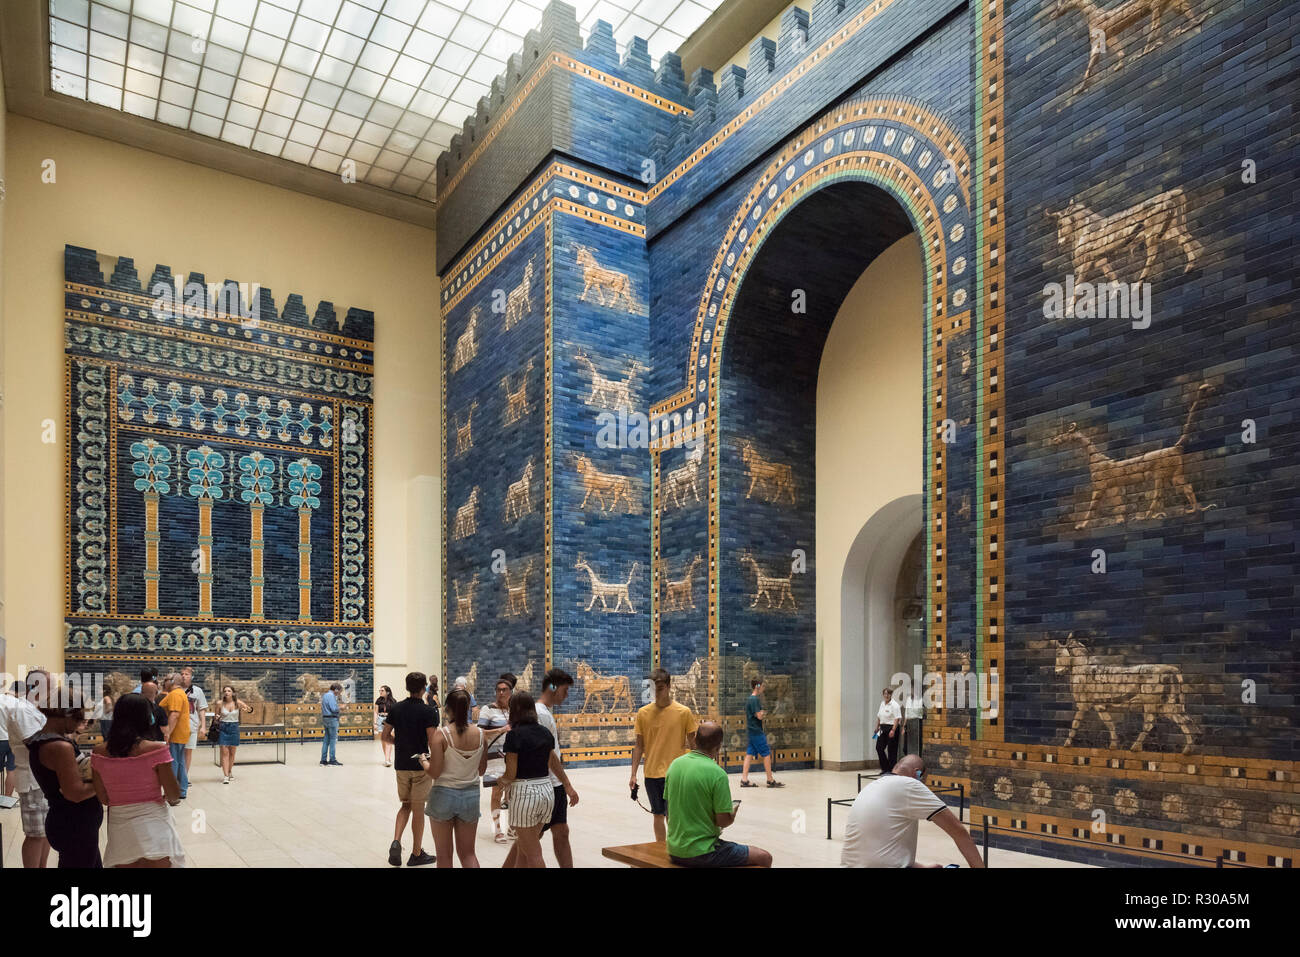 Berlin. Germany. Pergamon Museum. Reconstruction of the Ishtar Gate of Babylon, on the l/h side is the facade of King Nebuchadrezzar’s throne room, de Stock Photo